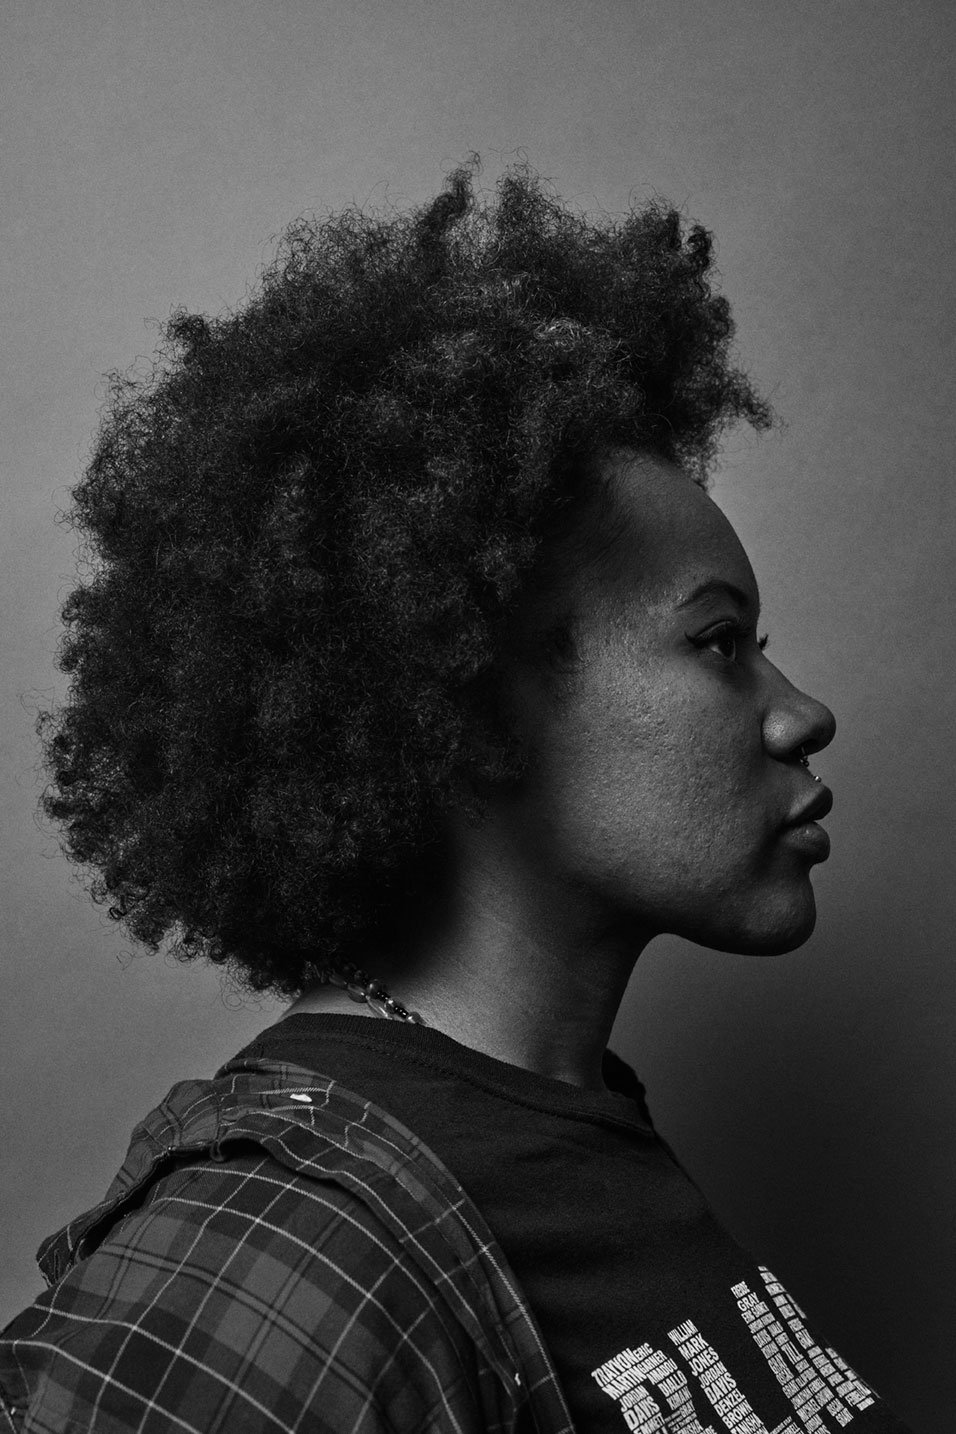 Profile black and white portrait of ShiShi Rose, community organizer and black wellness advocate for Romance Journal Issue 02 Resistance. Publication design, art direction, print design, interviews by RoAndCo. 